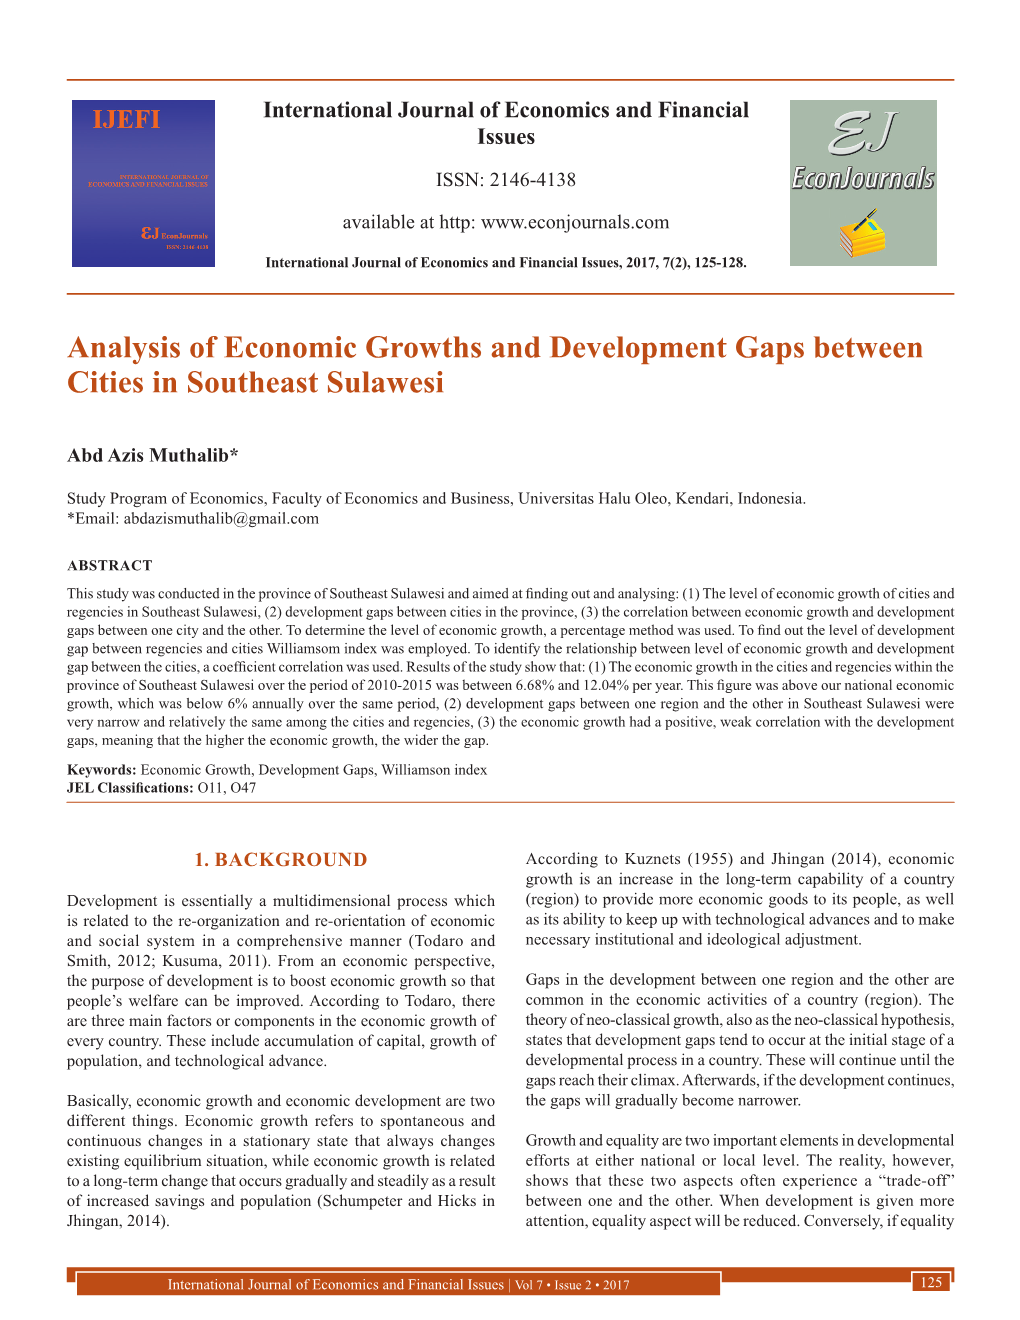 Analysis of Economic Growths and Development Gaps Between Cities in Southeast Sulawesi